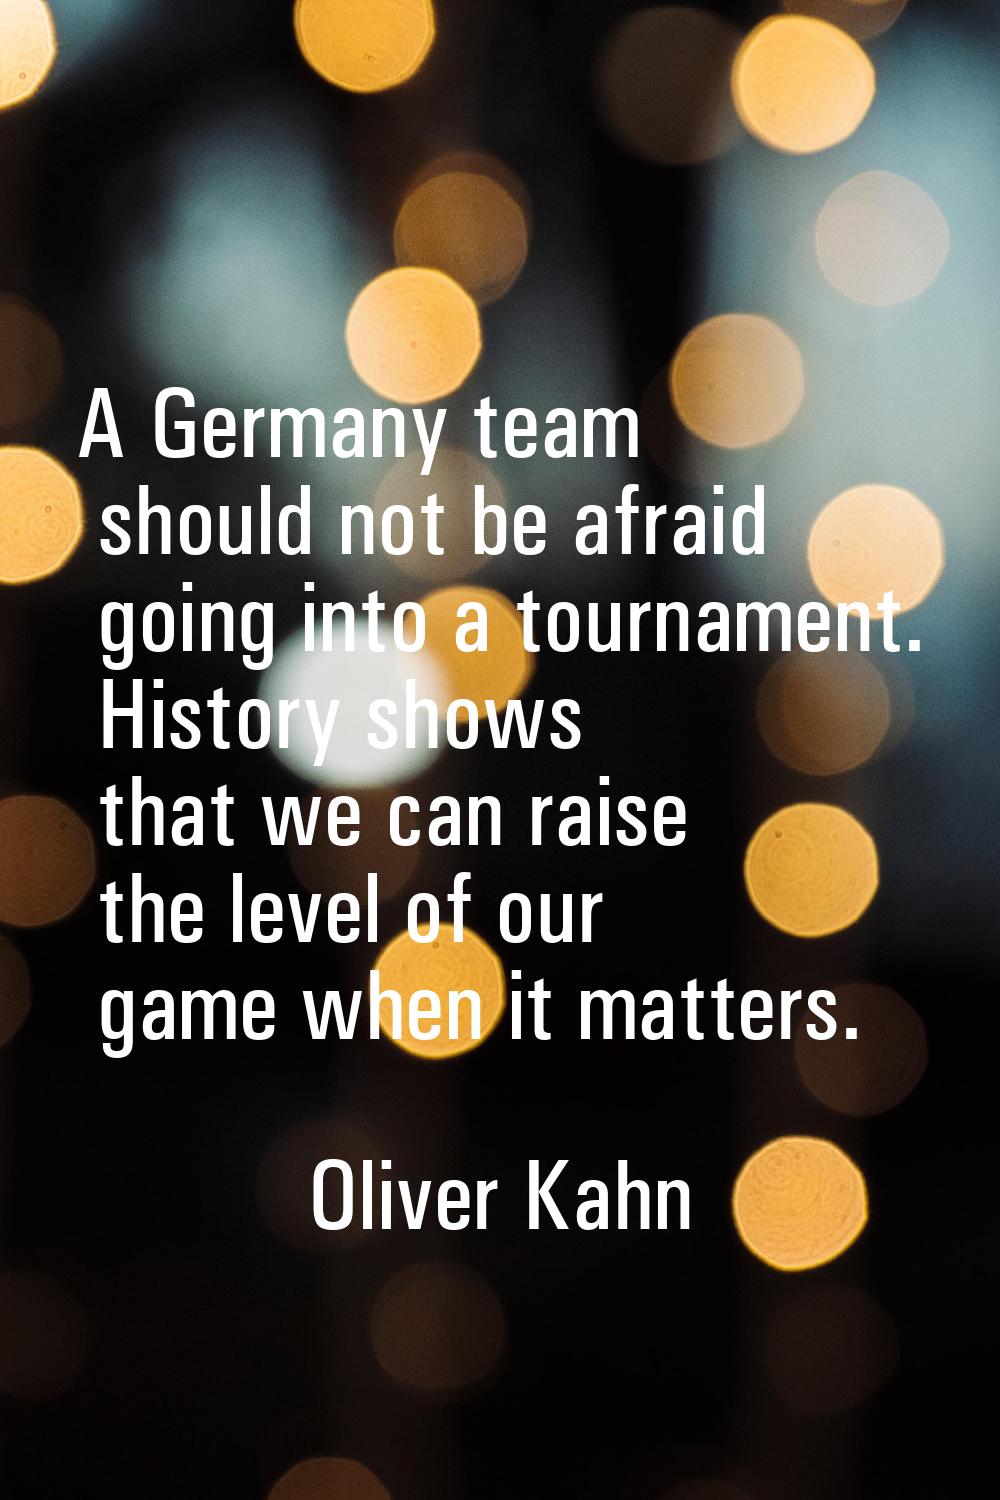 A Germany team should not be afraid going into a tournament. History shows that we can raise the le